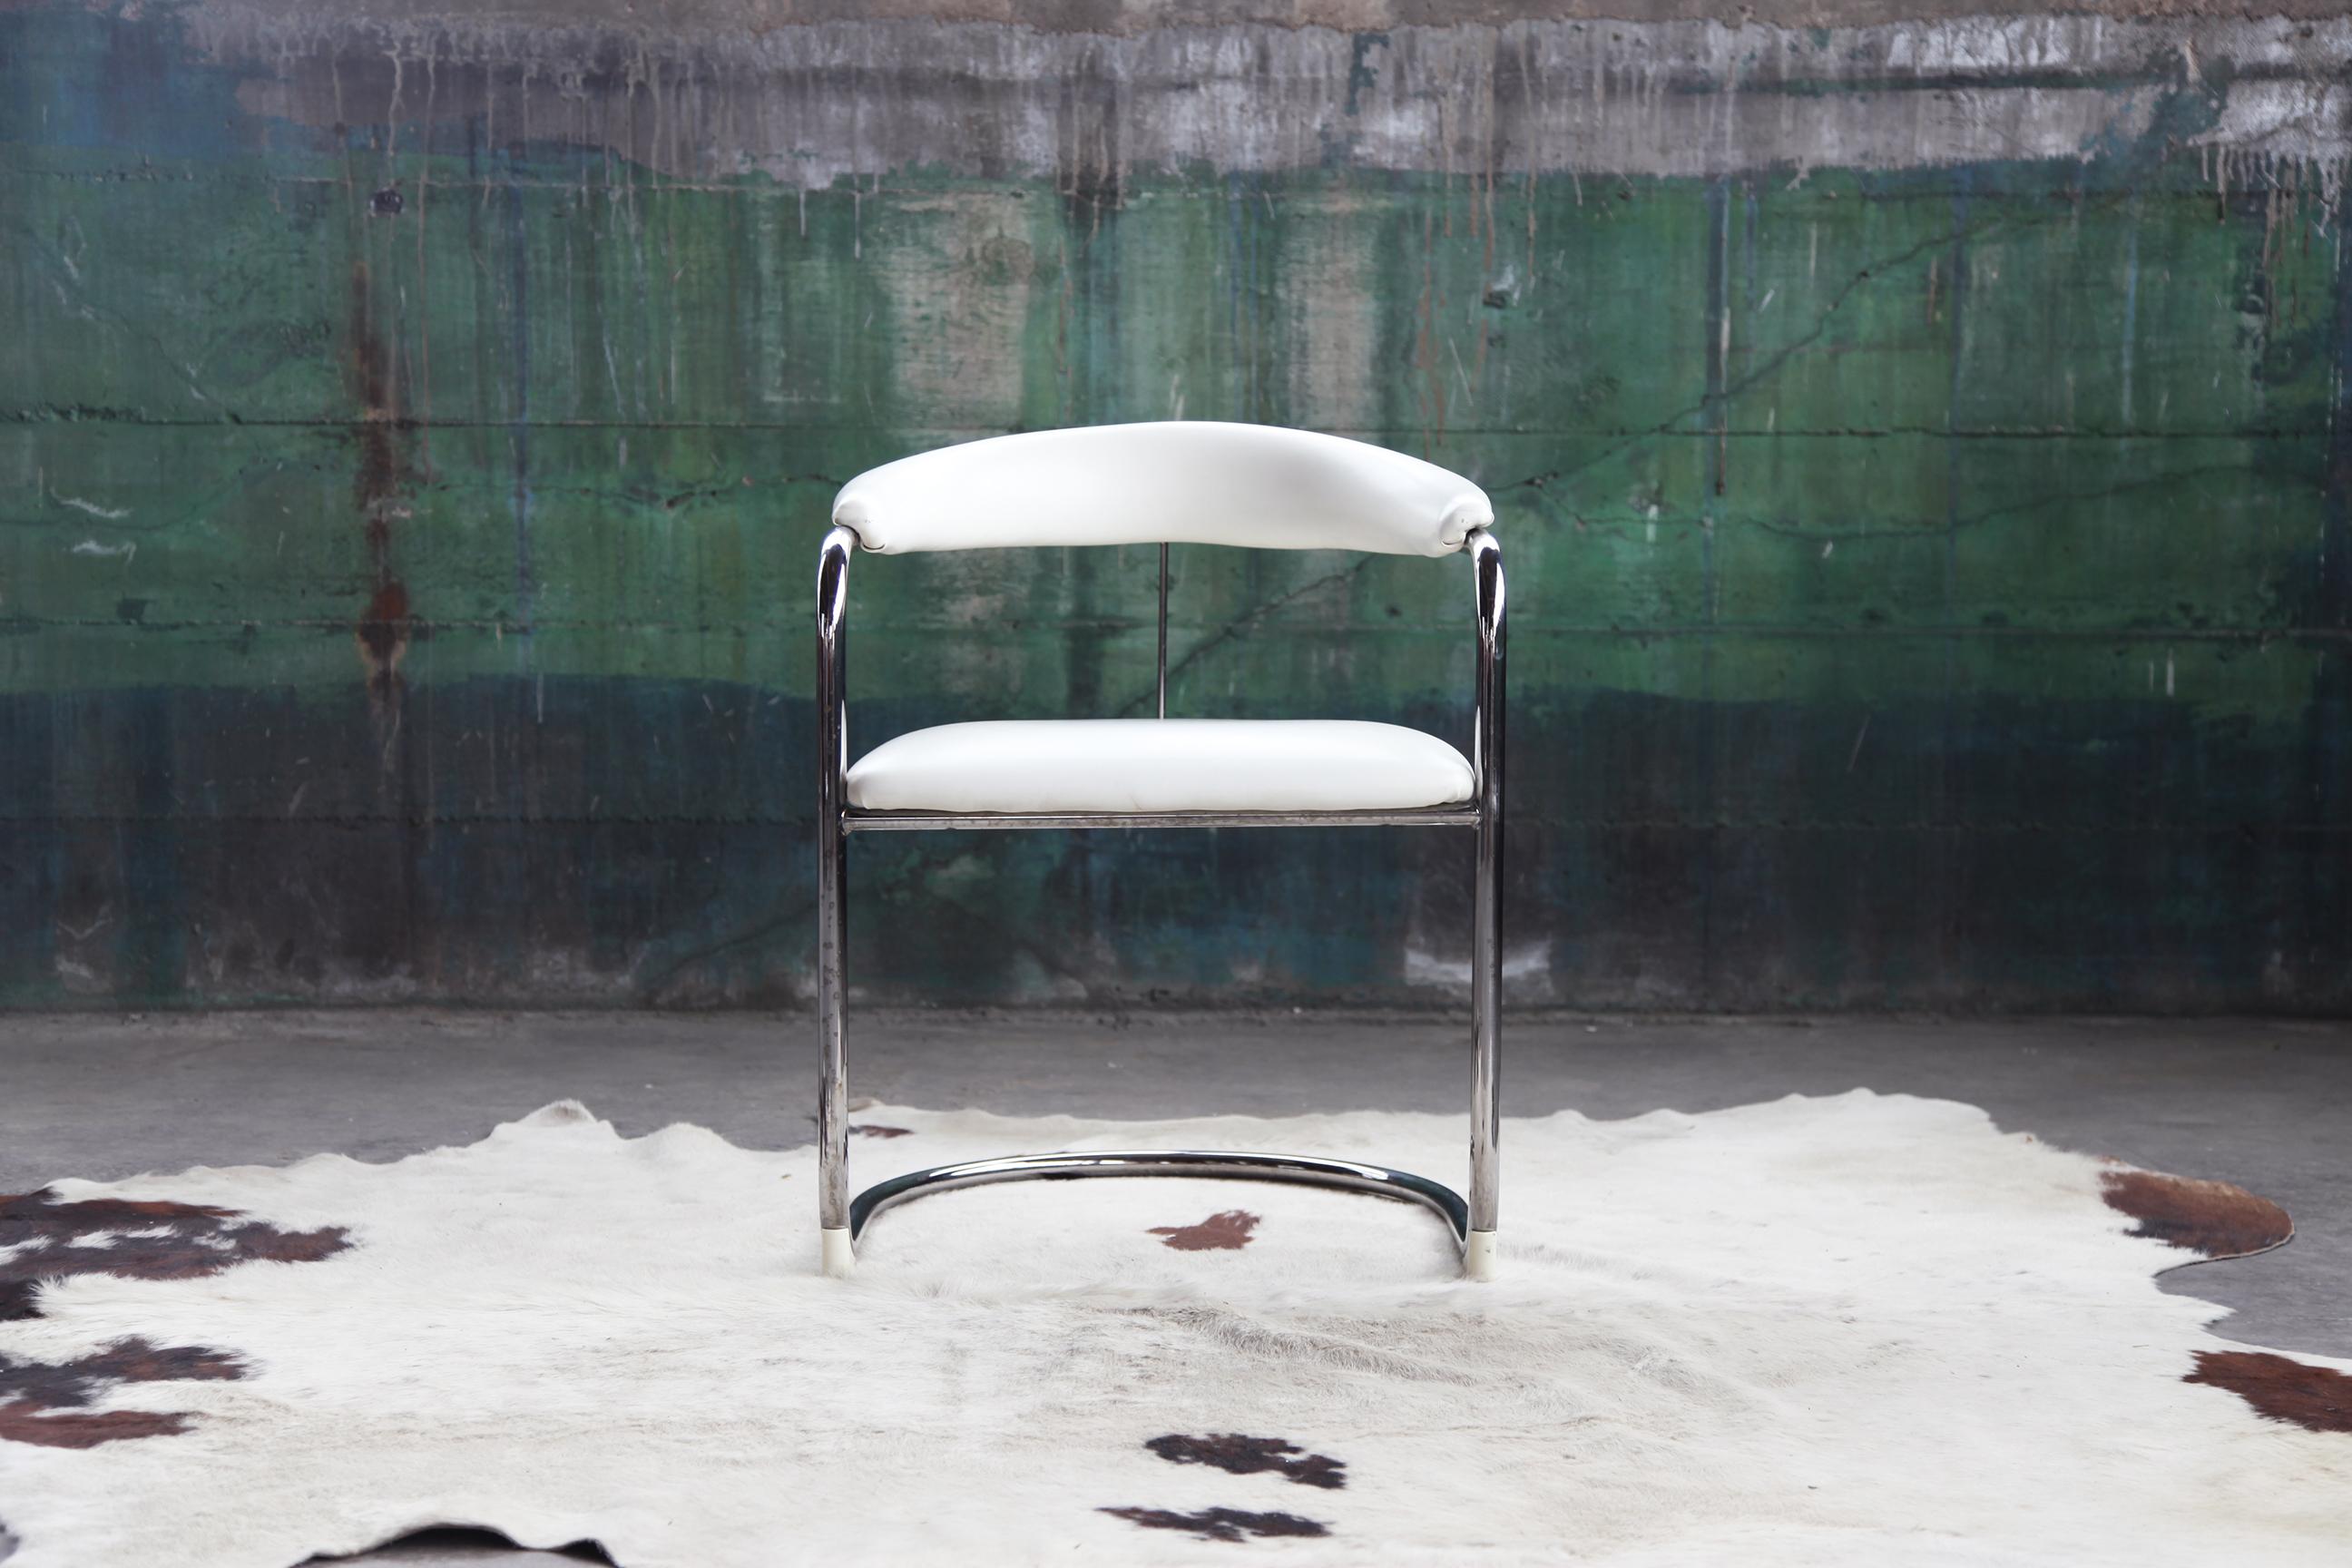 Stunning Anton Lorenz for Thonet Cantilevered Armchair in white.  
This is the Perfect opportunity to purchase just one as an accent chair!

Anton Lorenz (1891–1966) was a design pioneer and frequent collaborator of Marcel Breuer. He, along with